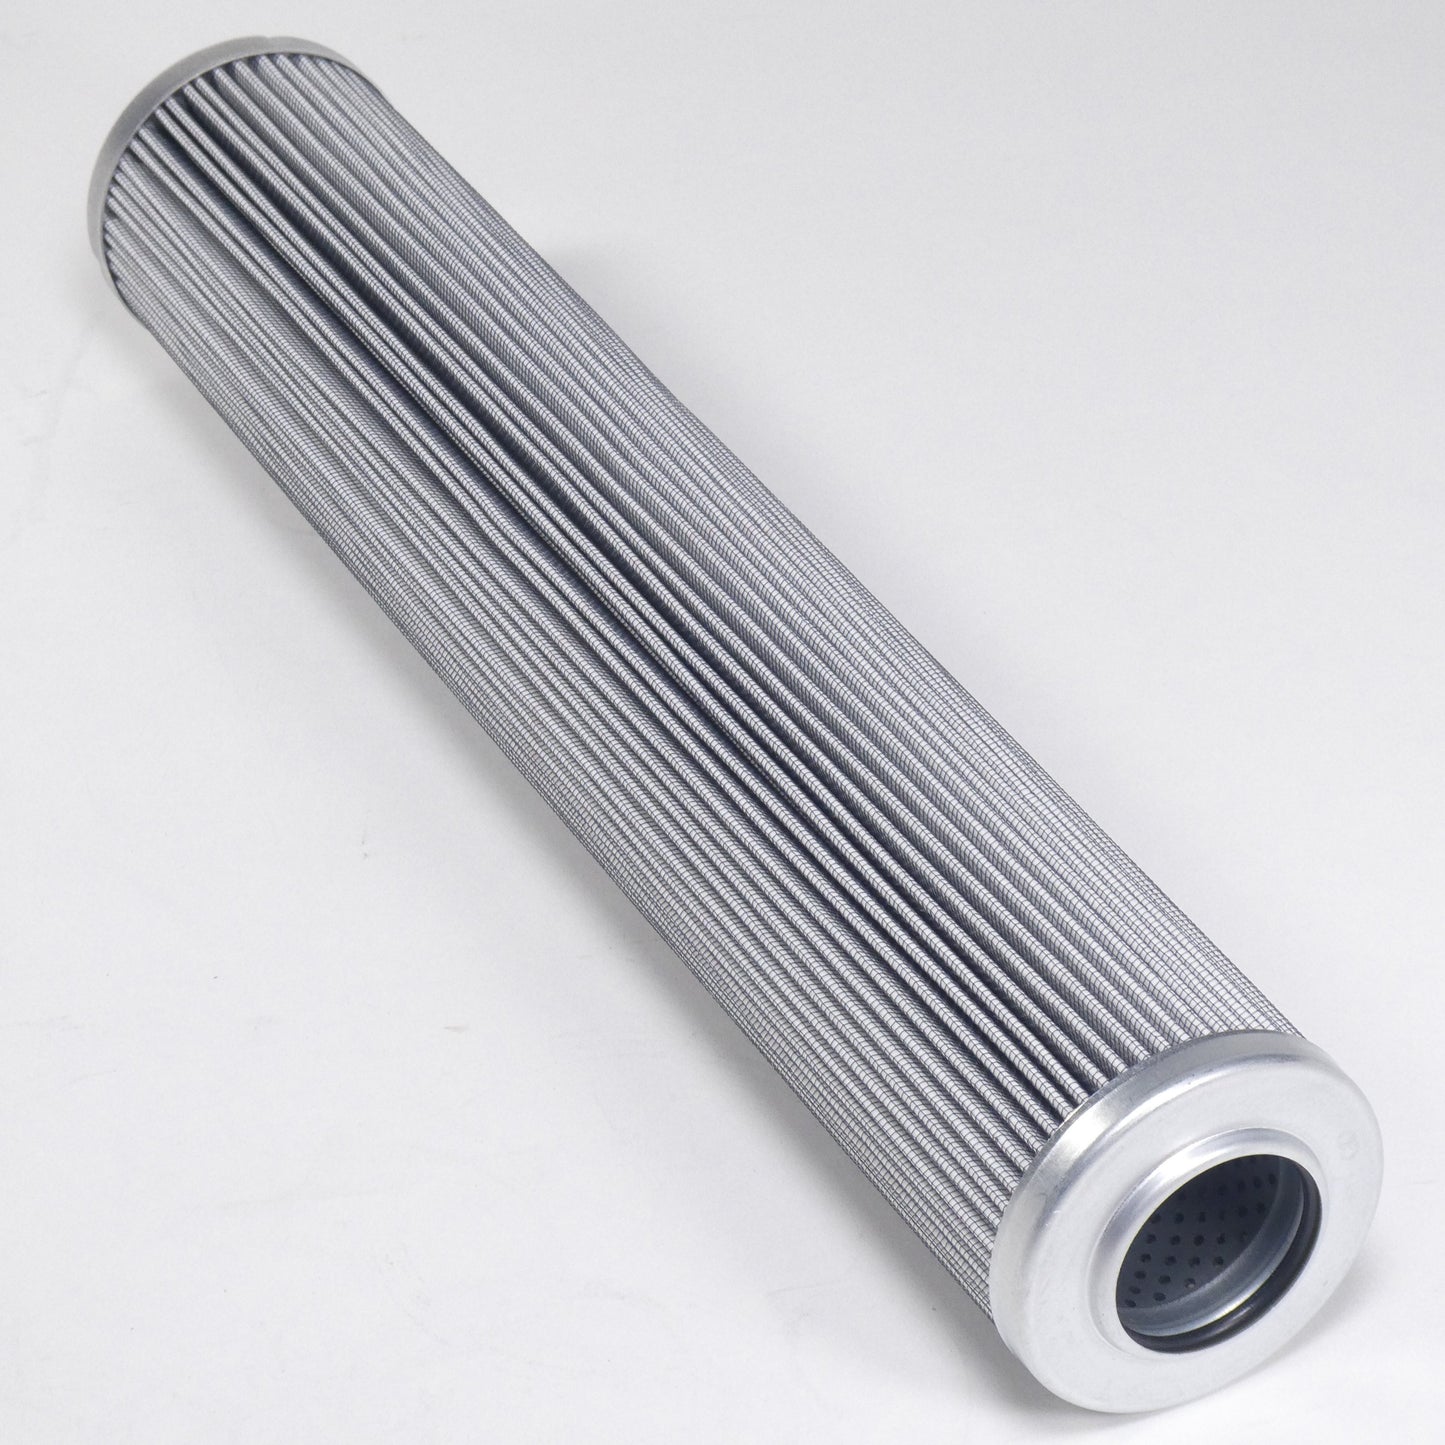 Hydrafil Replacement Filter Element for Internormen 05.9600.3VG.10.E.V.16